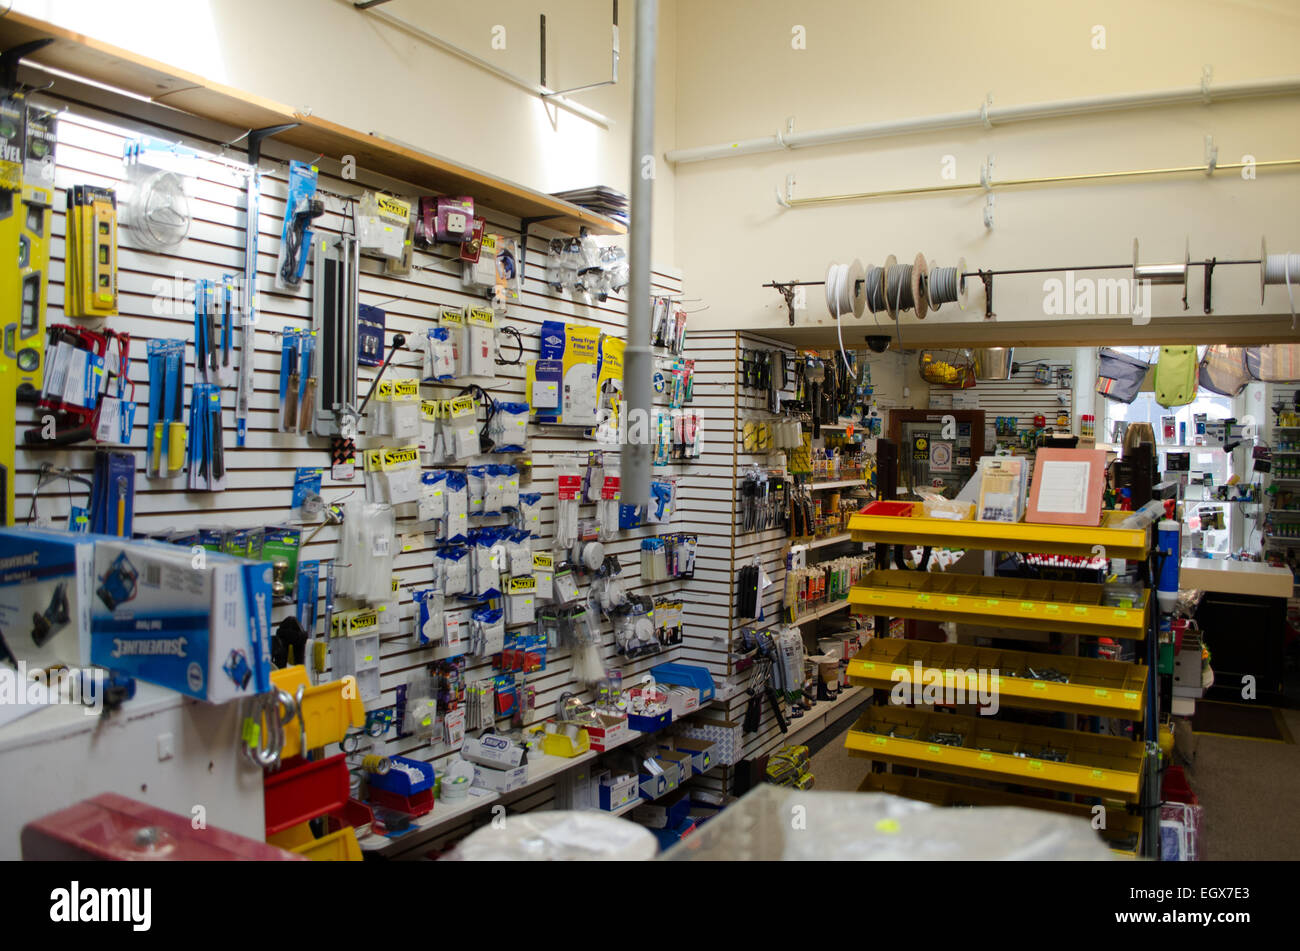 An image showing the inside of a hardware shop in West Wales Stock Photo